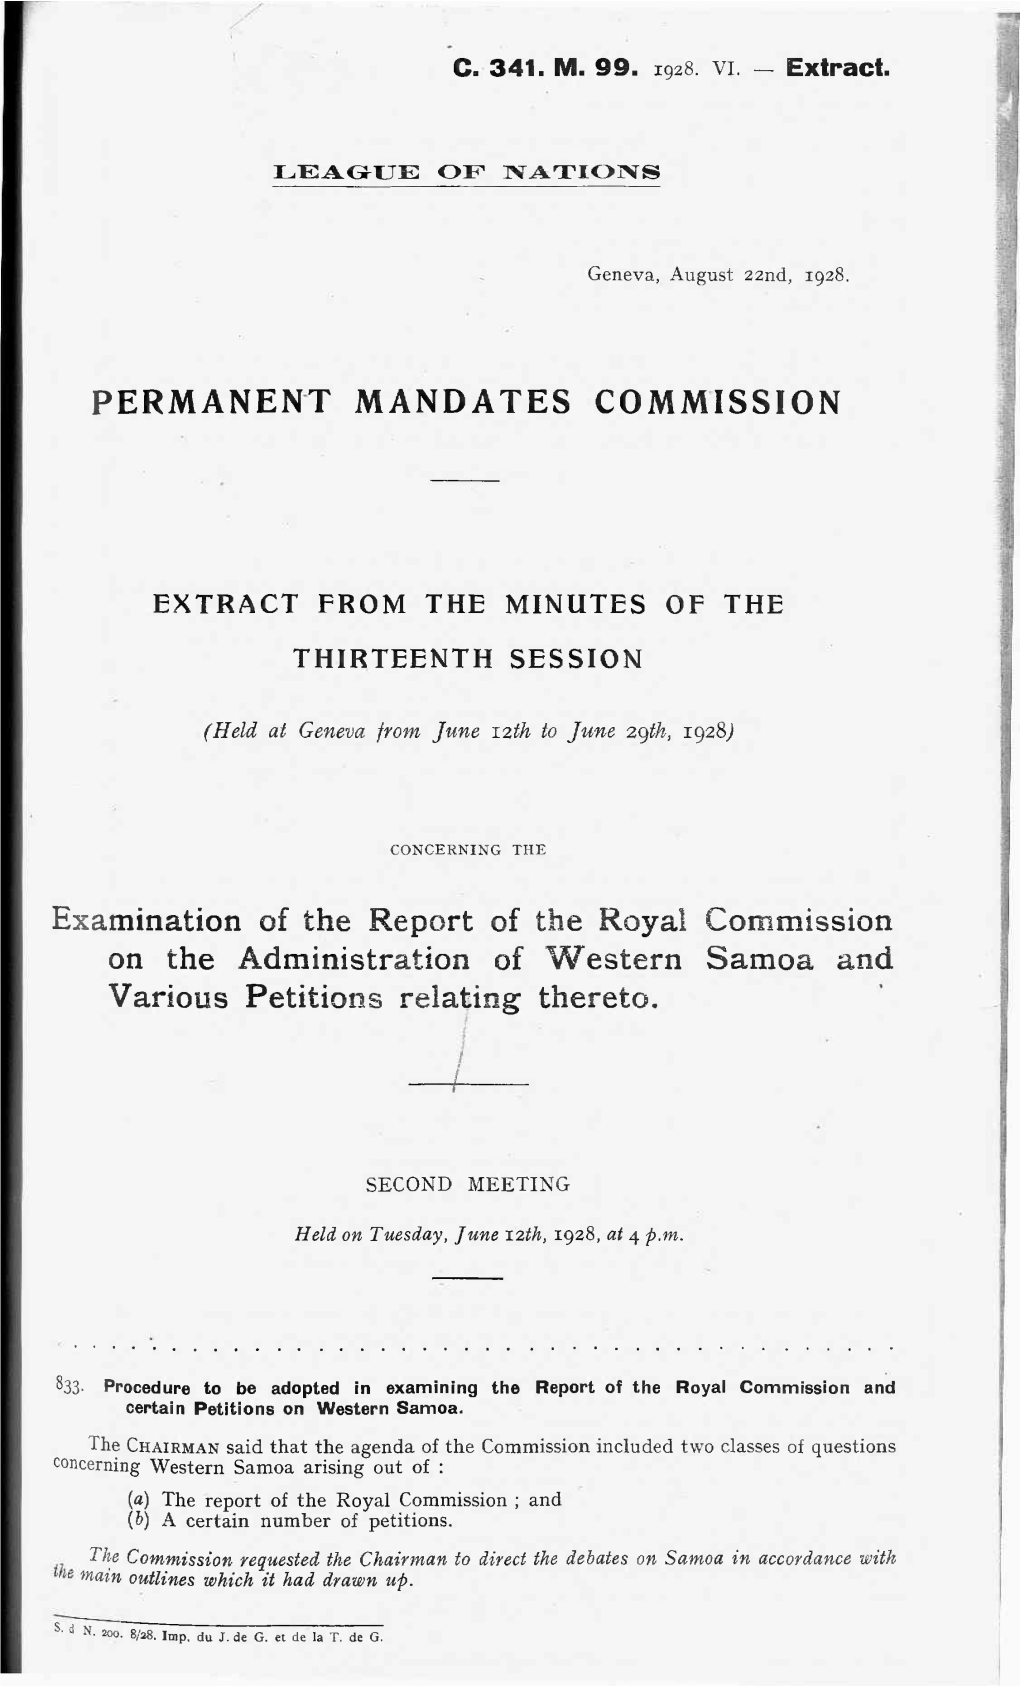 Examination of the Report of the Royal Commission on the Administration of Western Samoa and Various Petitions Relating Thereto